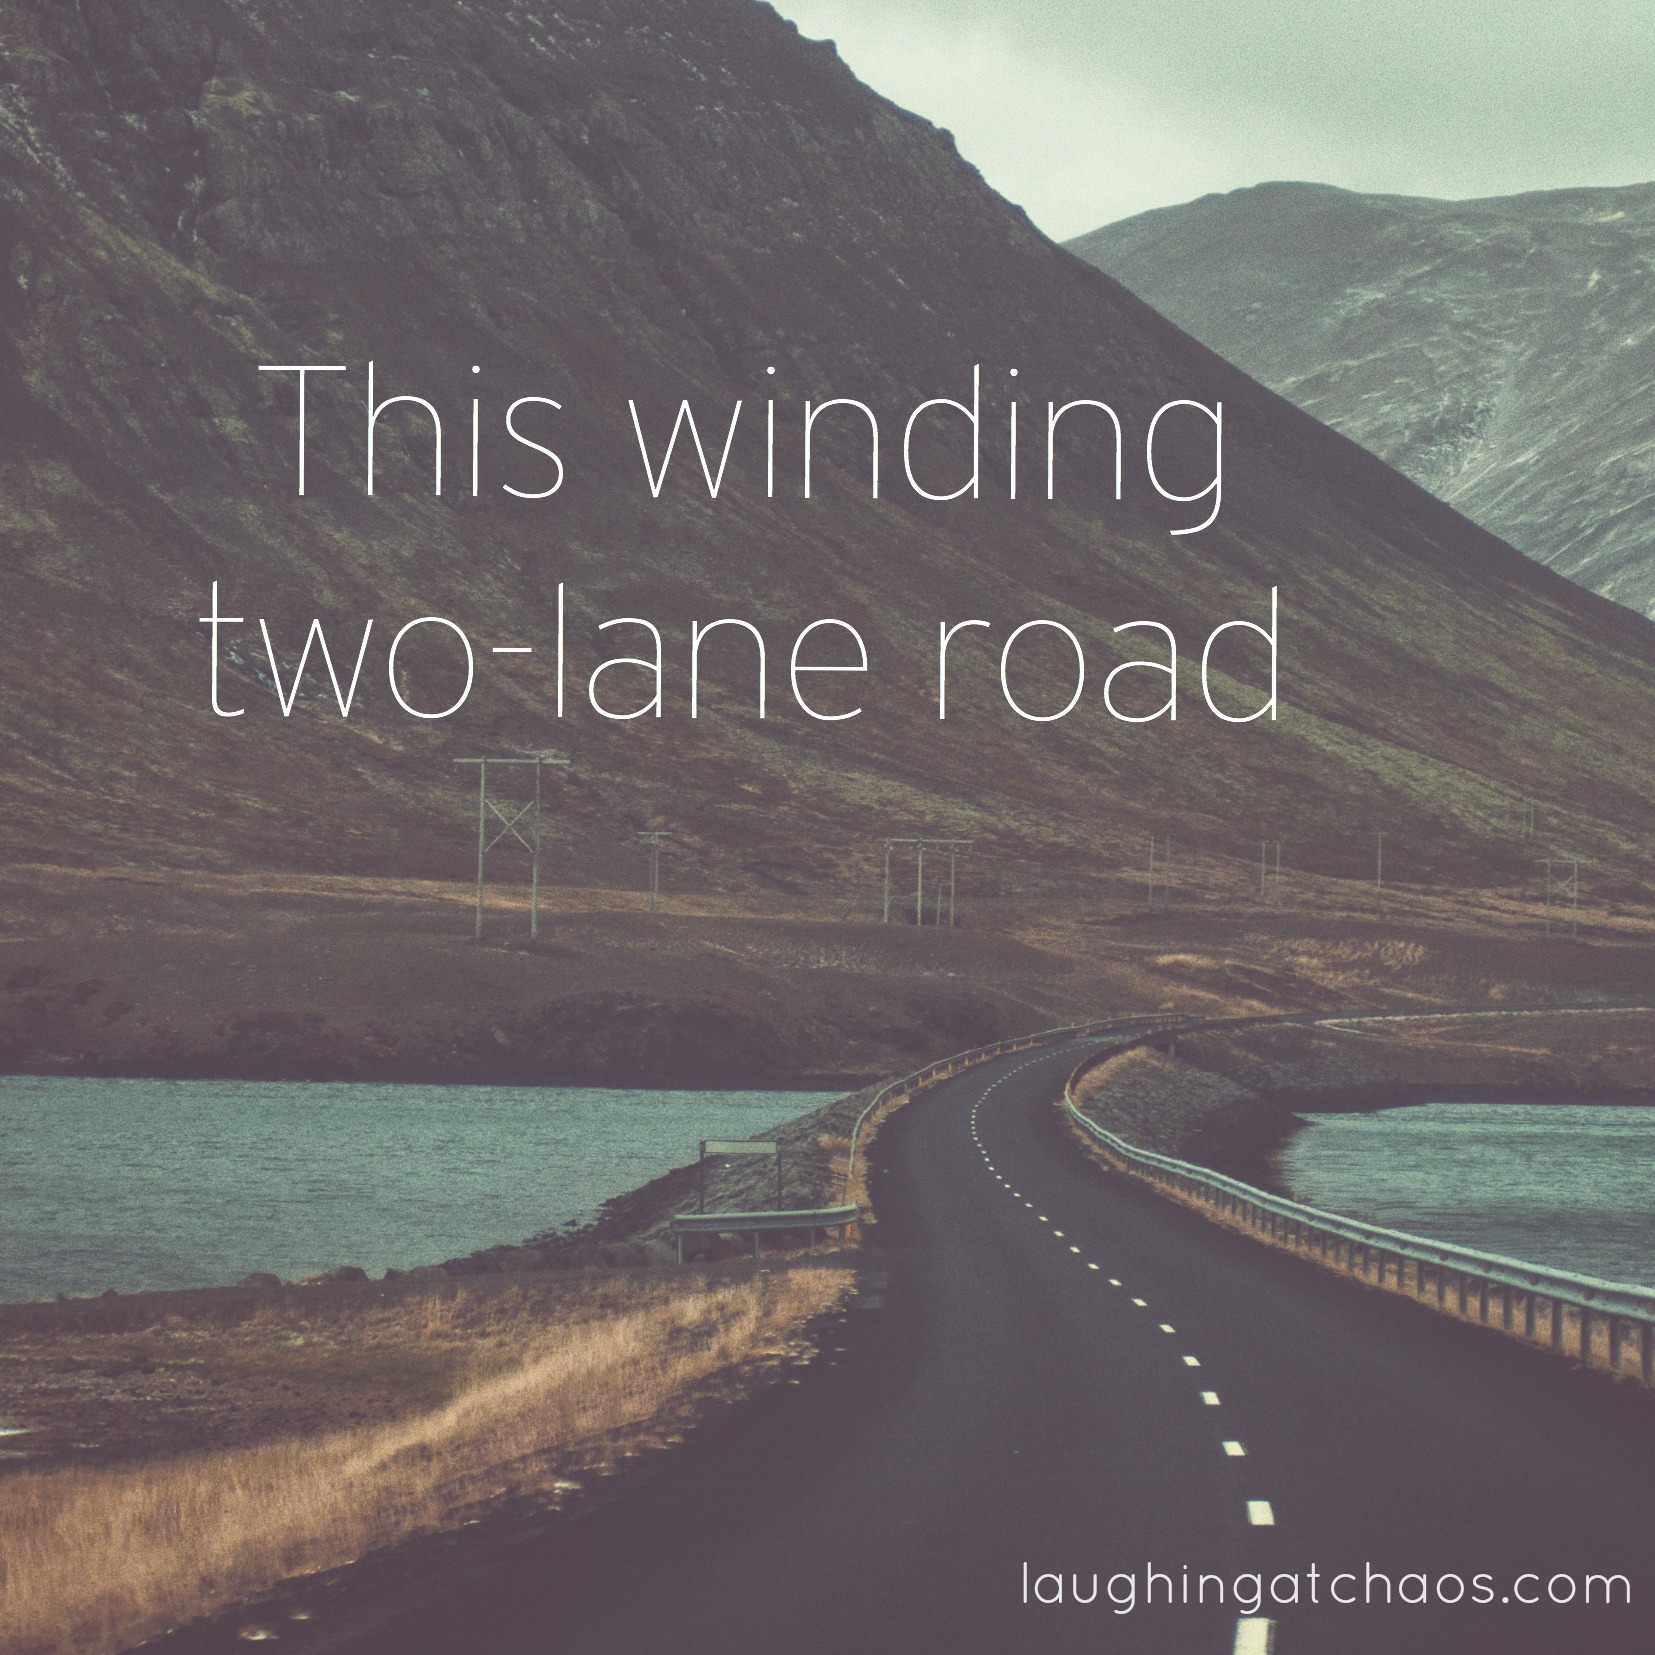 This winding two-lane road